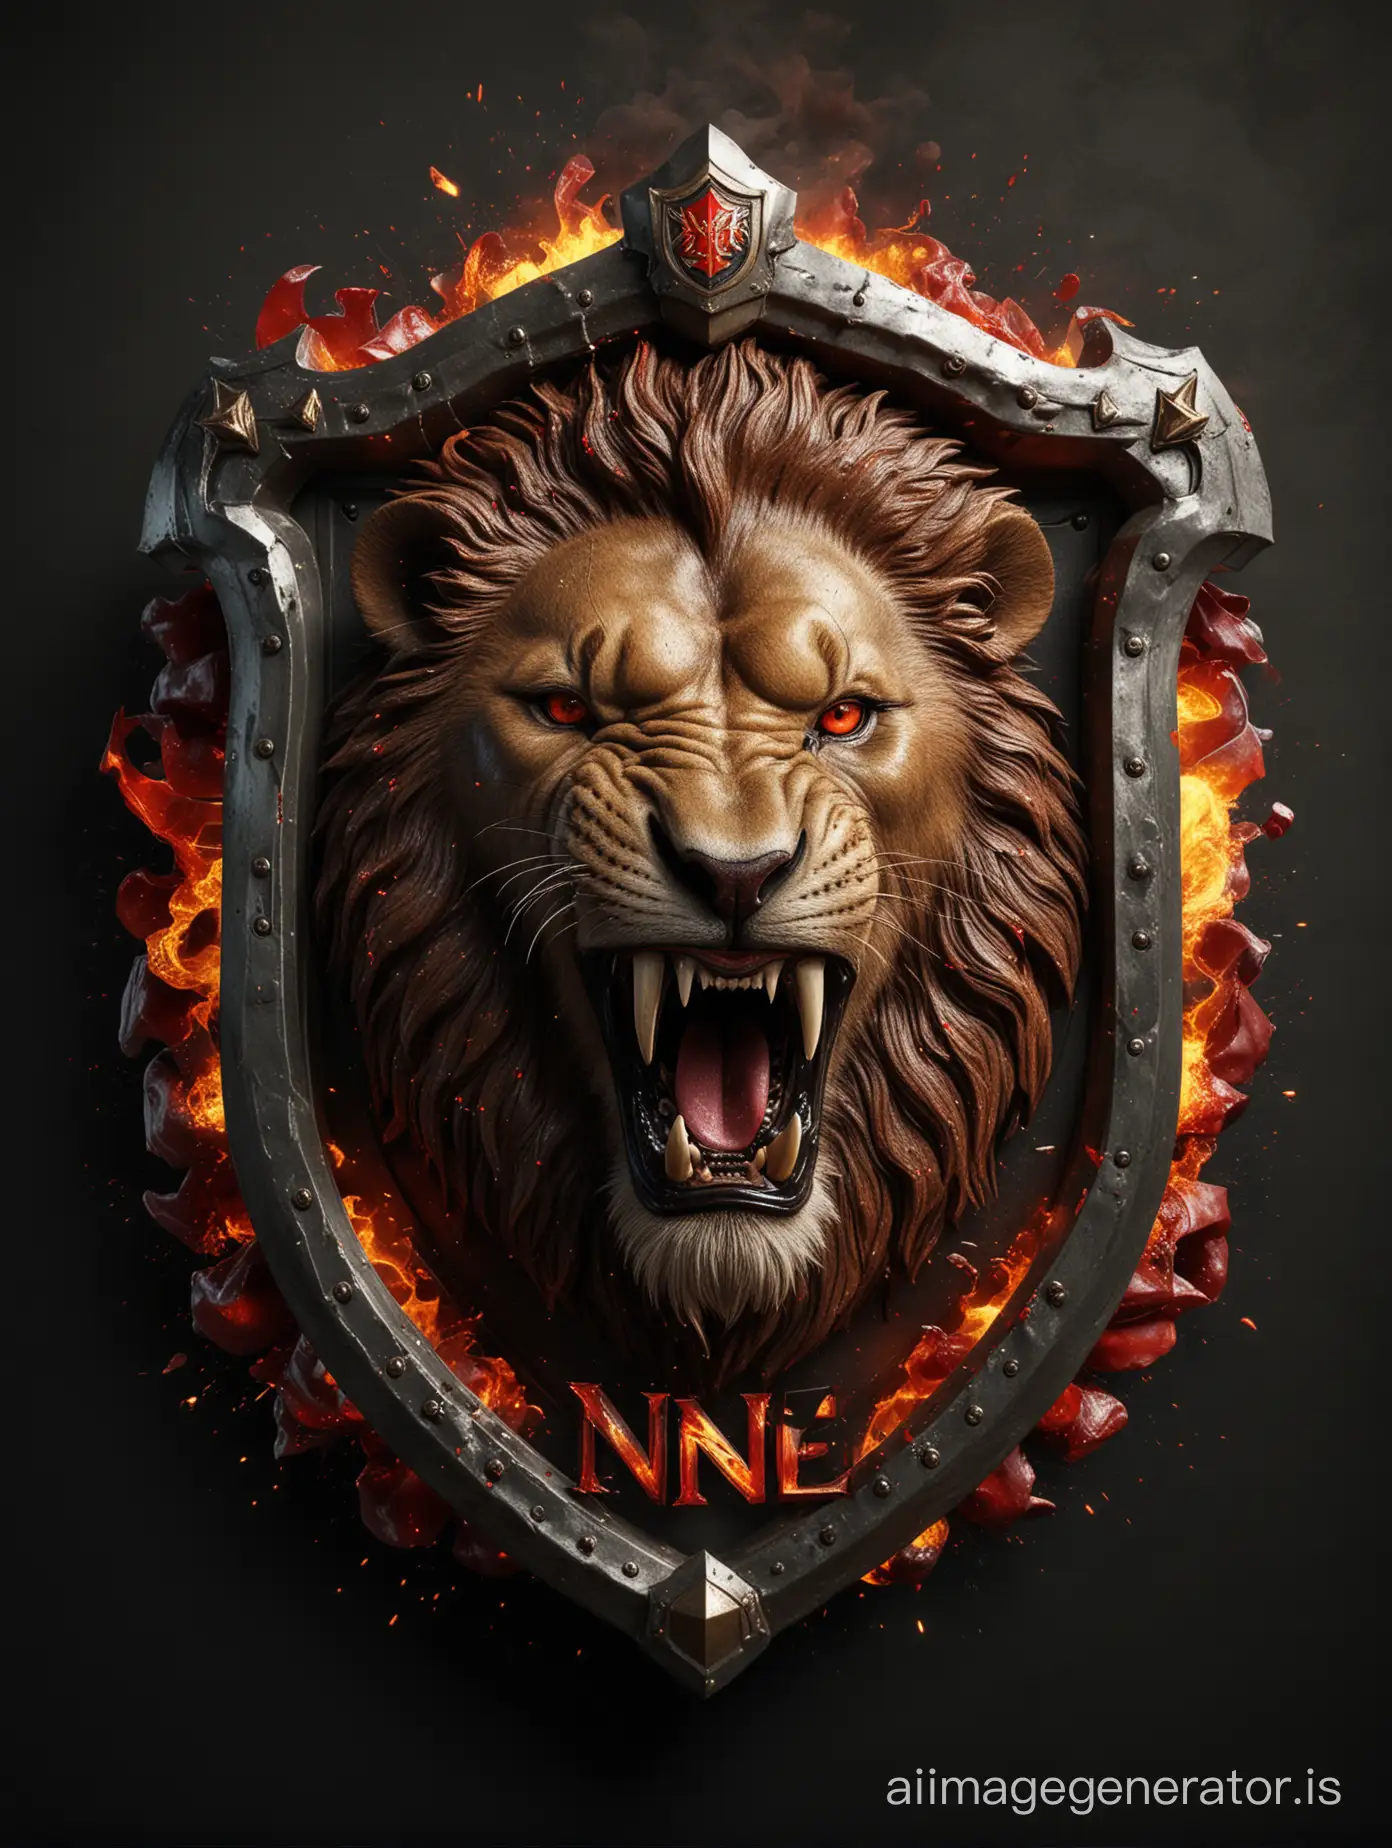 Luxurious 3d metal logo with a realistic photograph of a ferocious, hungry lion opening its mouth, with a murderous stare above a shield with a red ribbon and glass reading "NDIAYE" on a black background, with a shield logo fragment effect and a large explosion of fire.